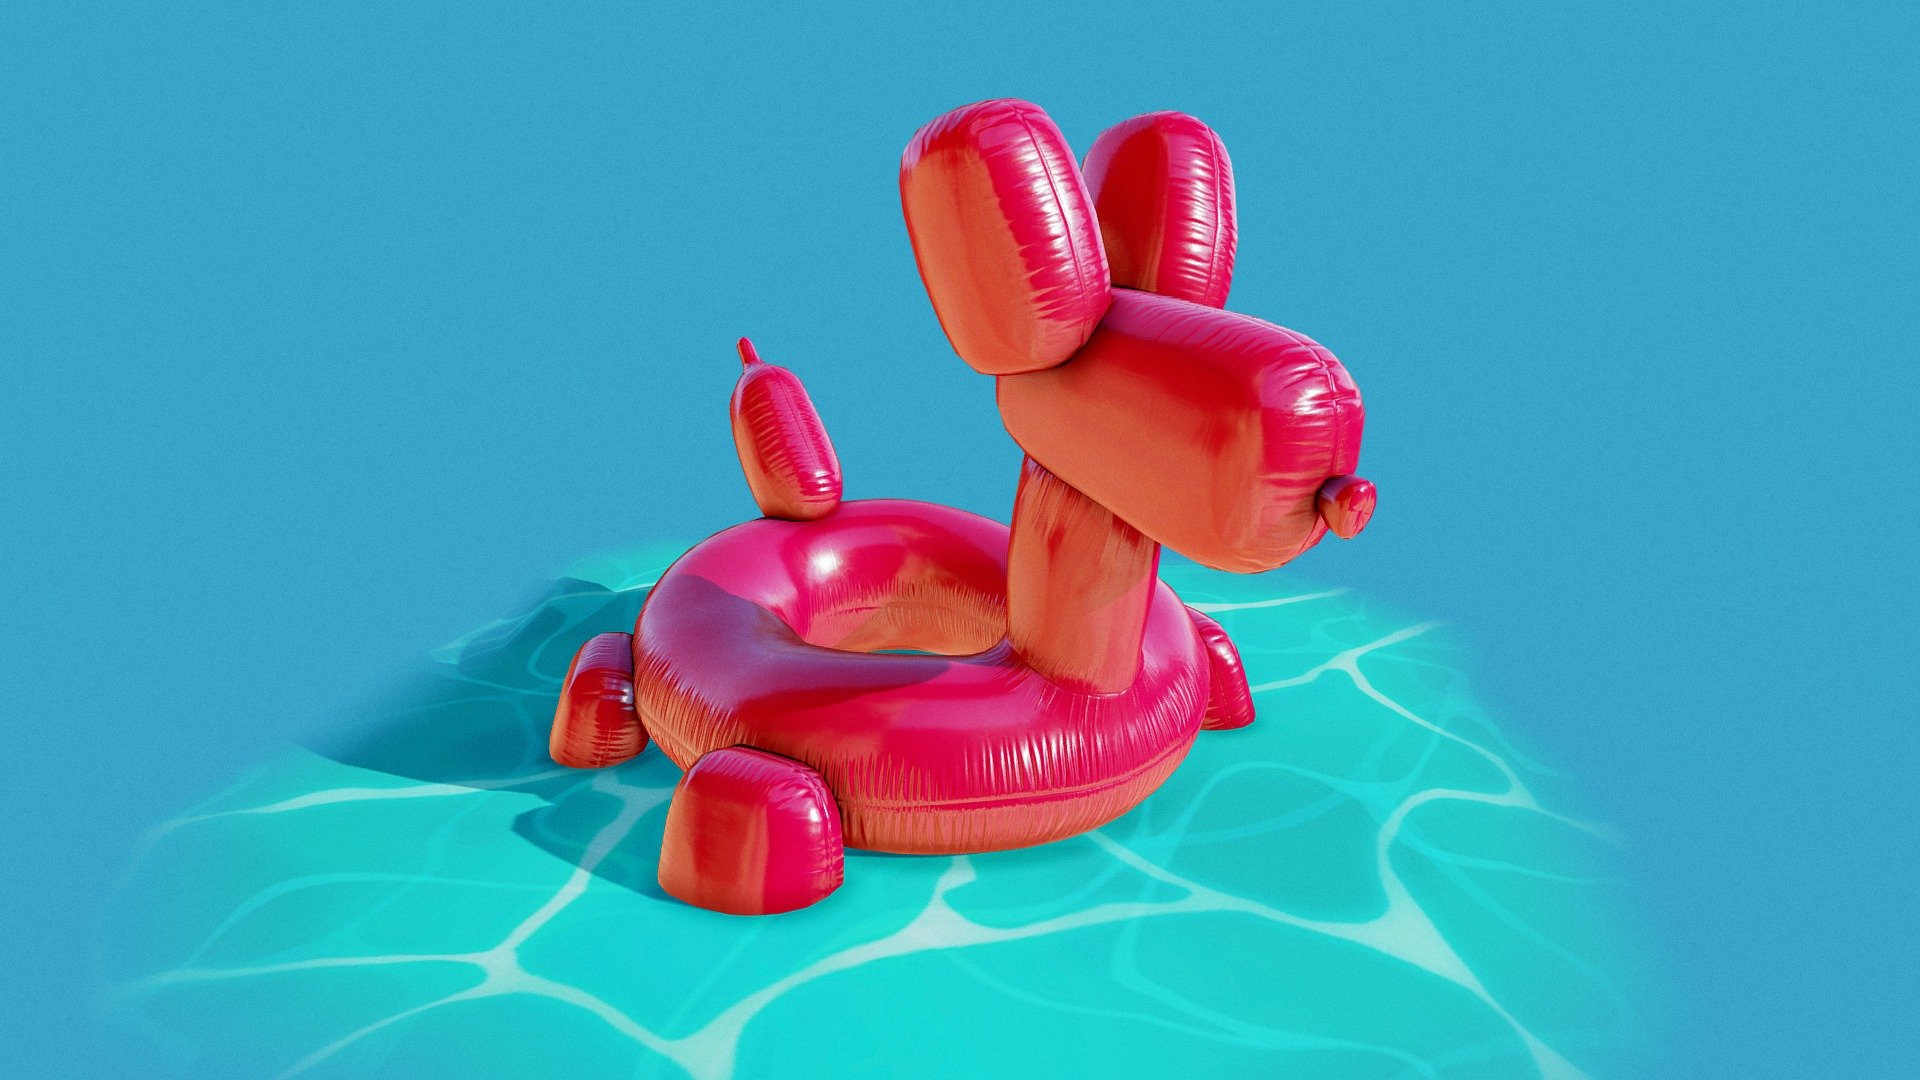 Inflatable Dog Balloon Float pool



Formats
* .max
* .3ds
* .fbx
* .obj
* .STL (Water is not included in the STL file)
 - Inflatable Dog Balloon (Printable) - Buy Royalty Free 3D model by msanjurj 3d model